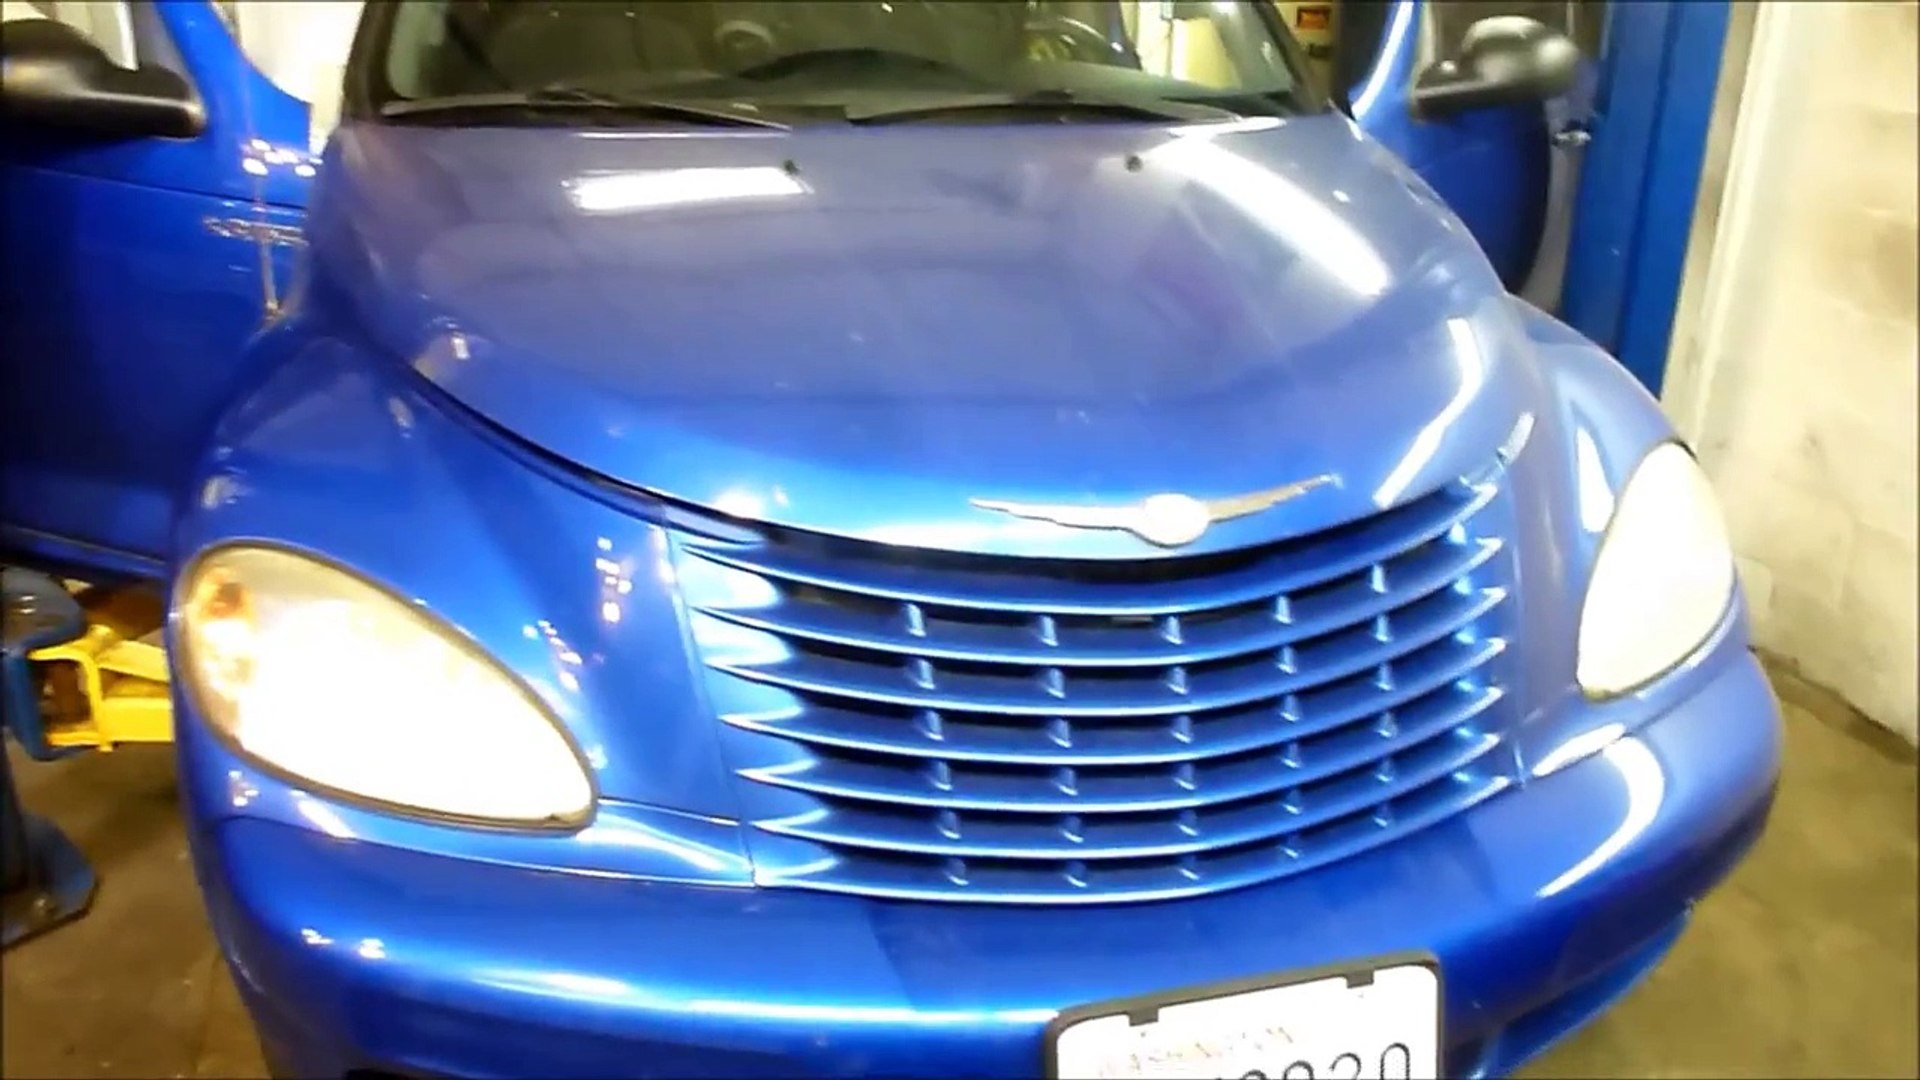 Pt Cruiser Dash Lights Replacement - Dailymotion Video